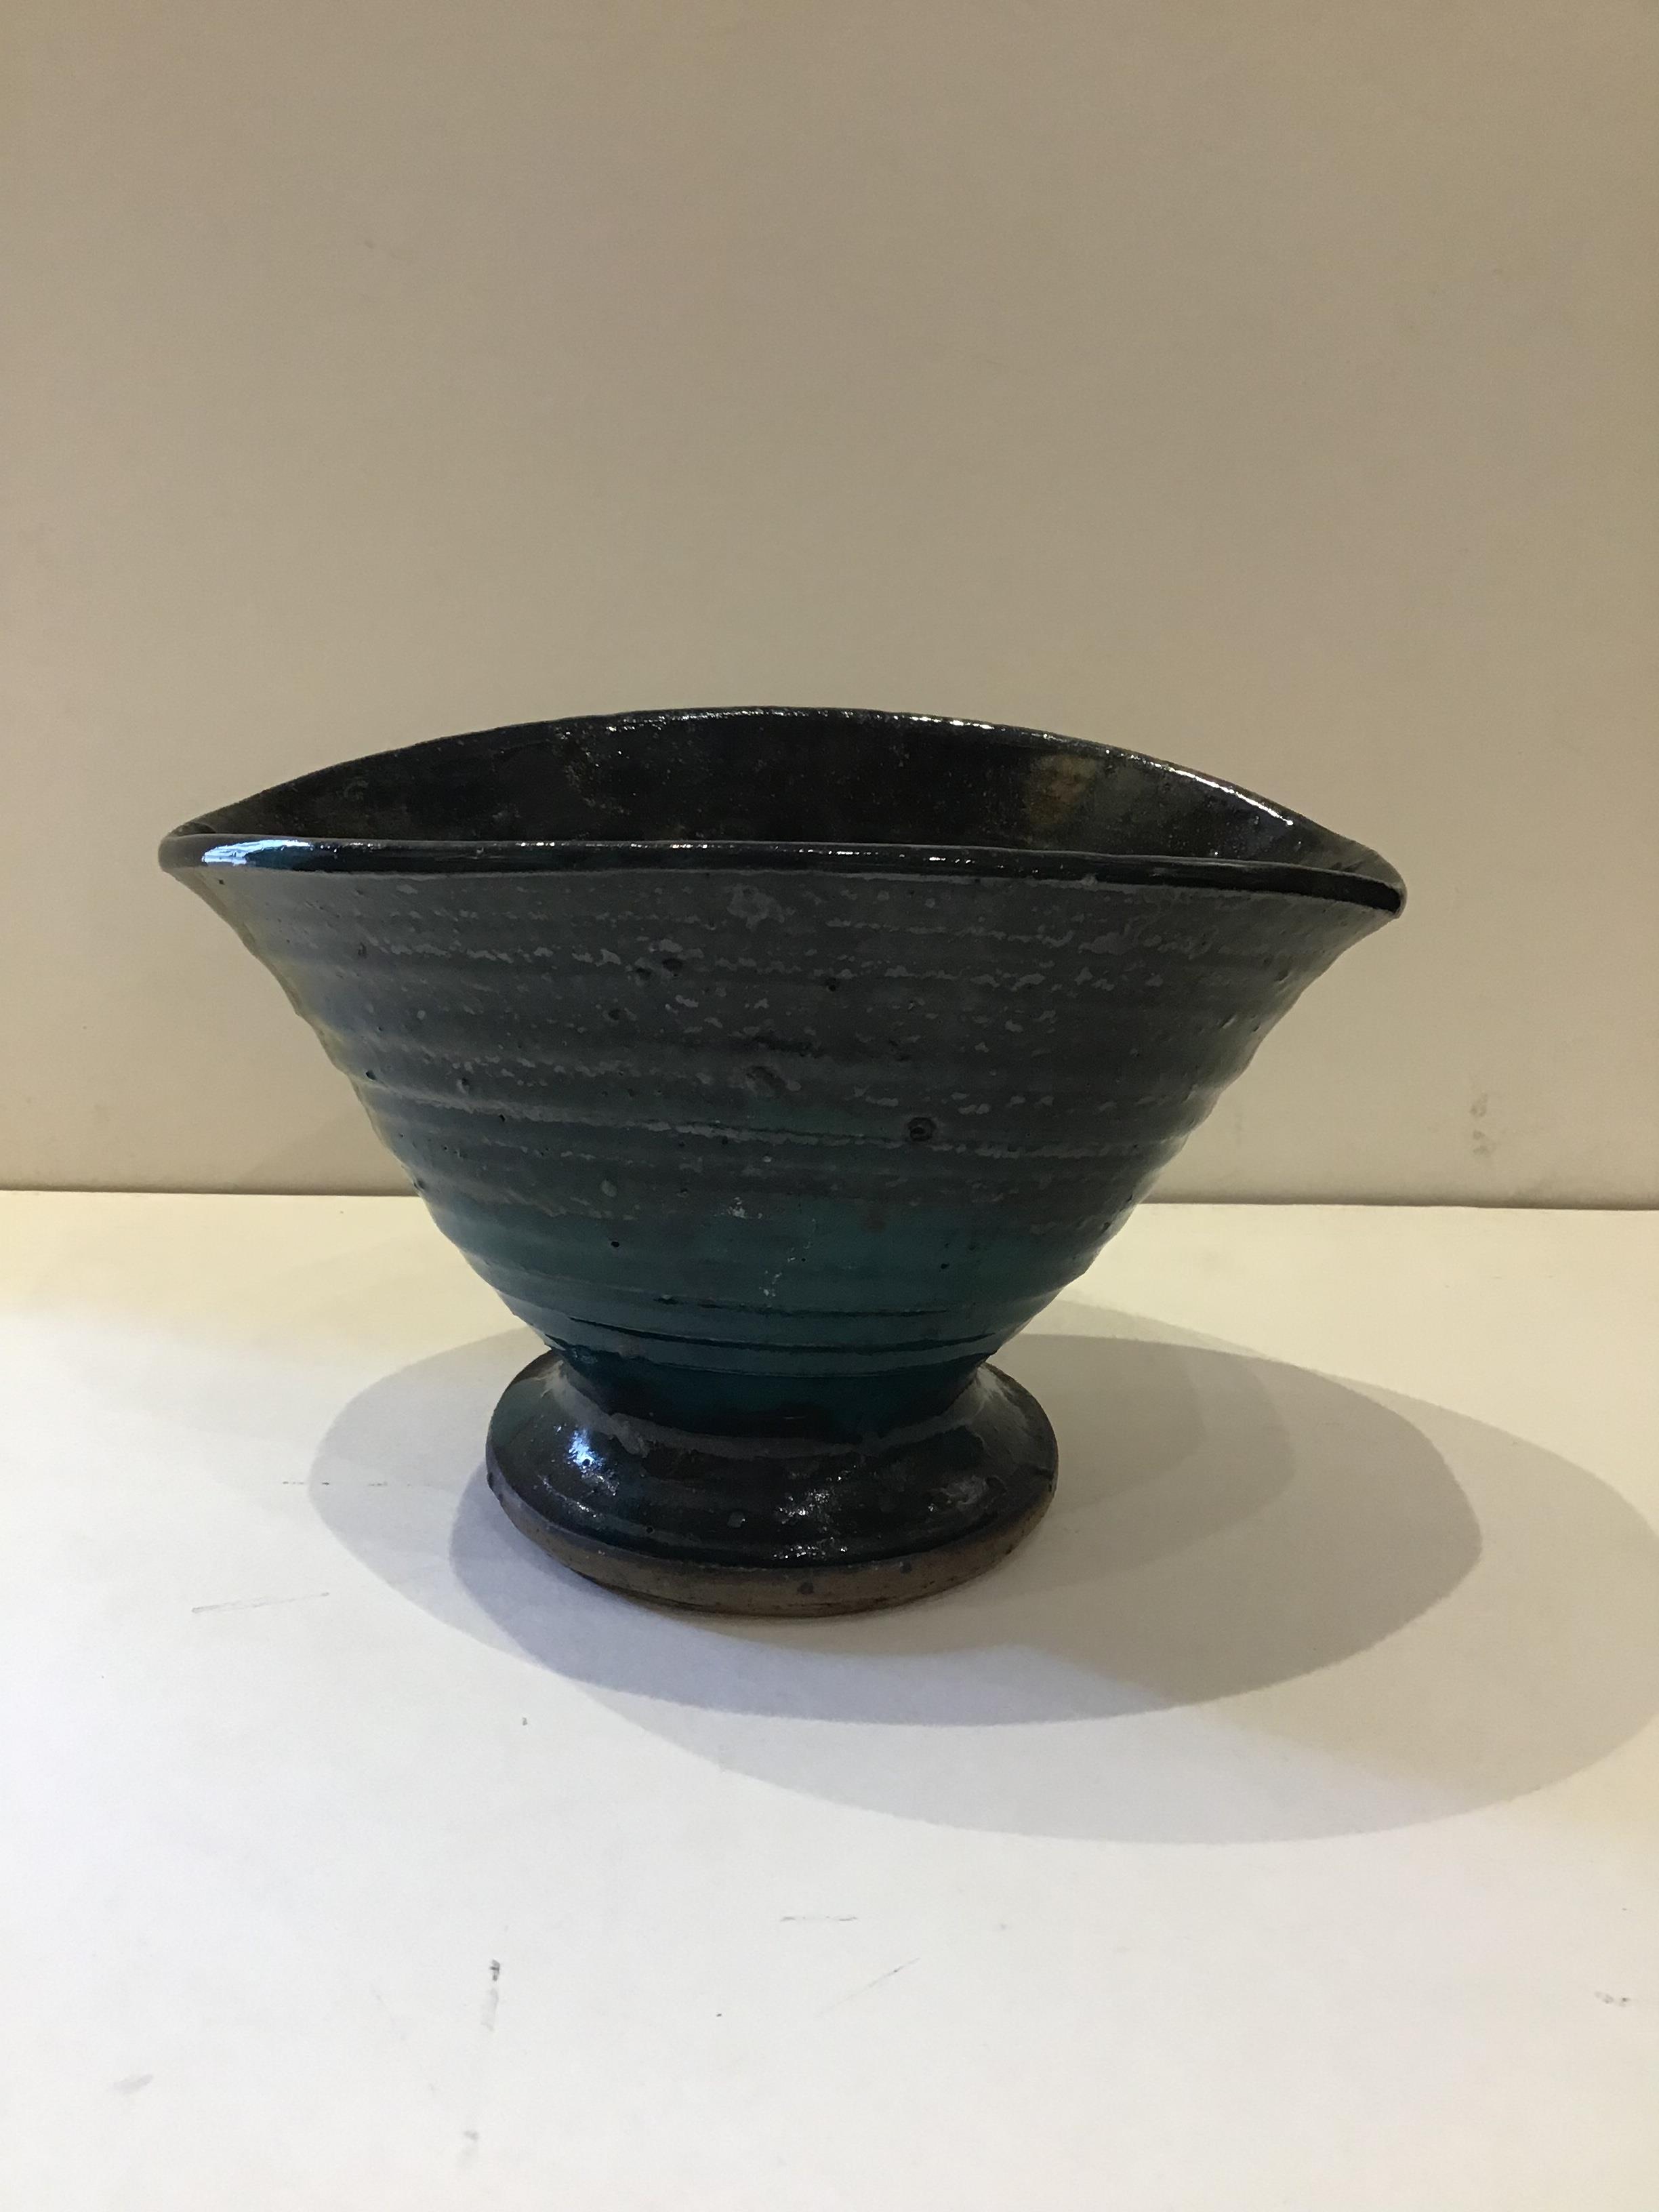 Rosemary Wren (1922-2013) at Oxshott Pottery Bowl squeezed form with green and dark glaze